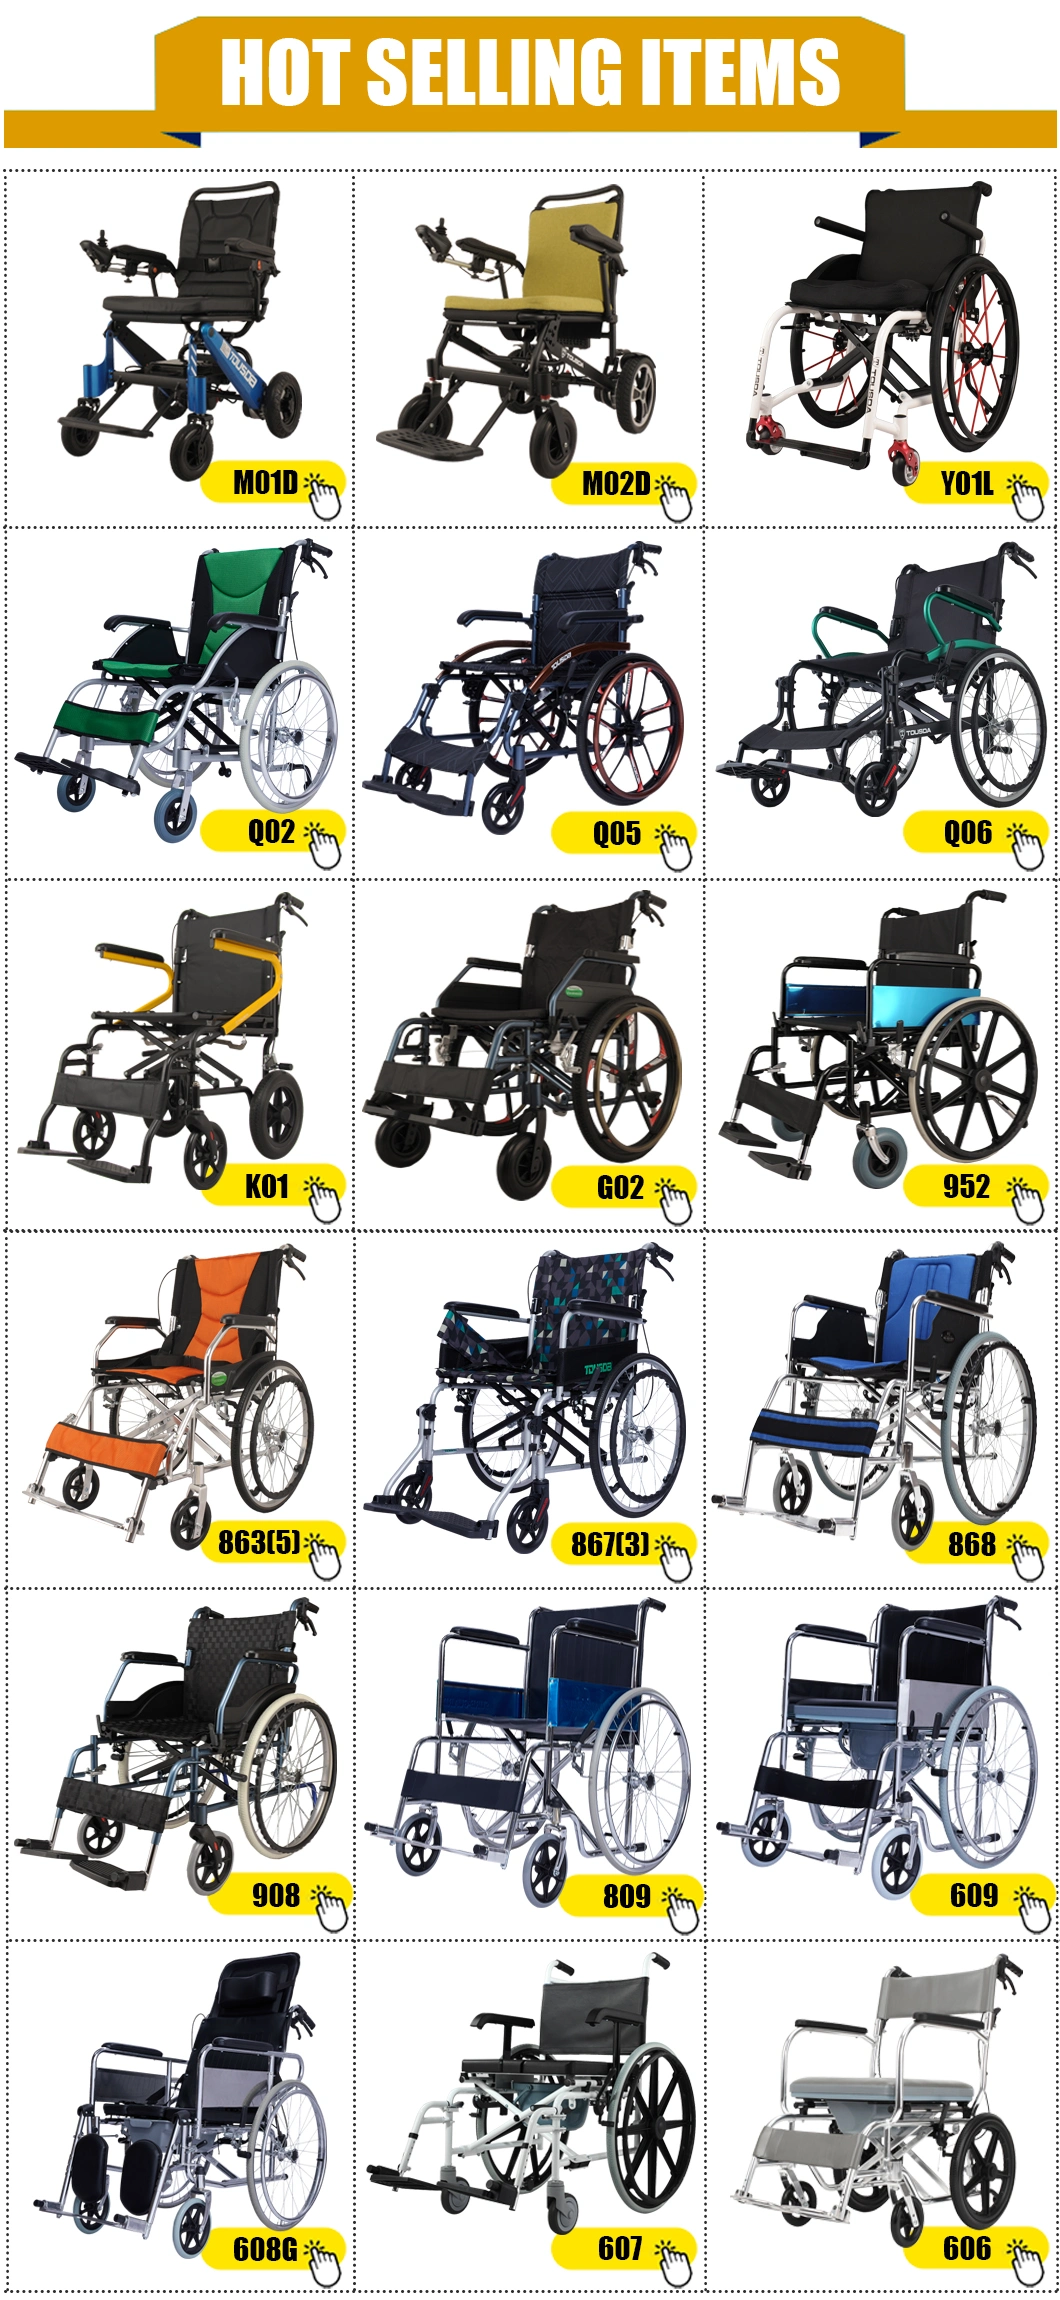 Commode Wheelchair Patient Aid Equipment for Elderly and Disabled Persons with Limited Mobility